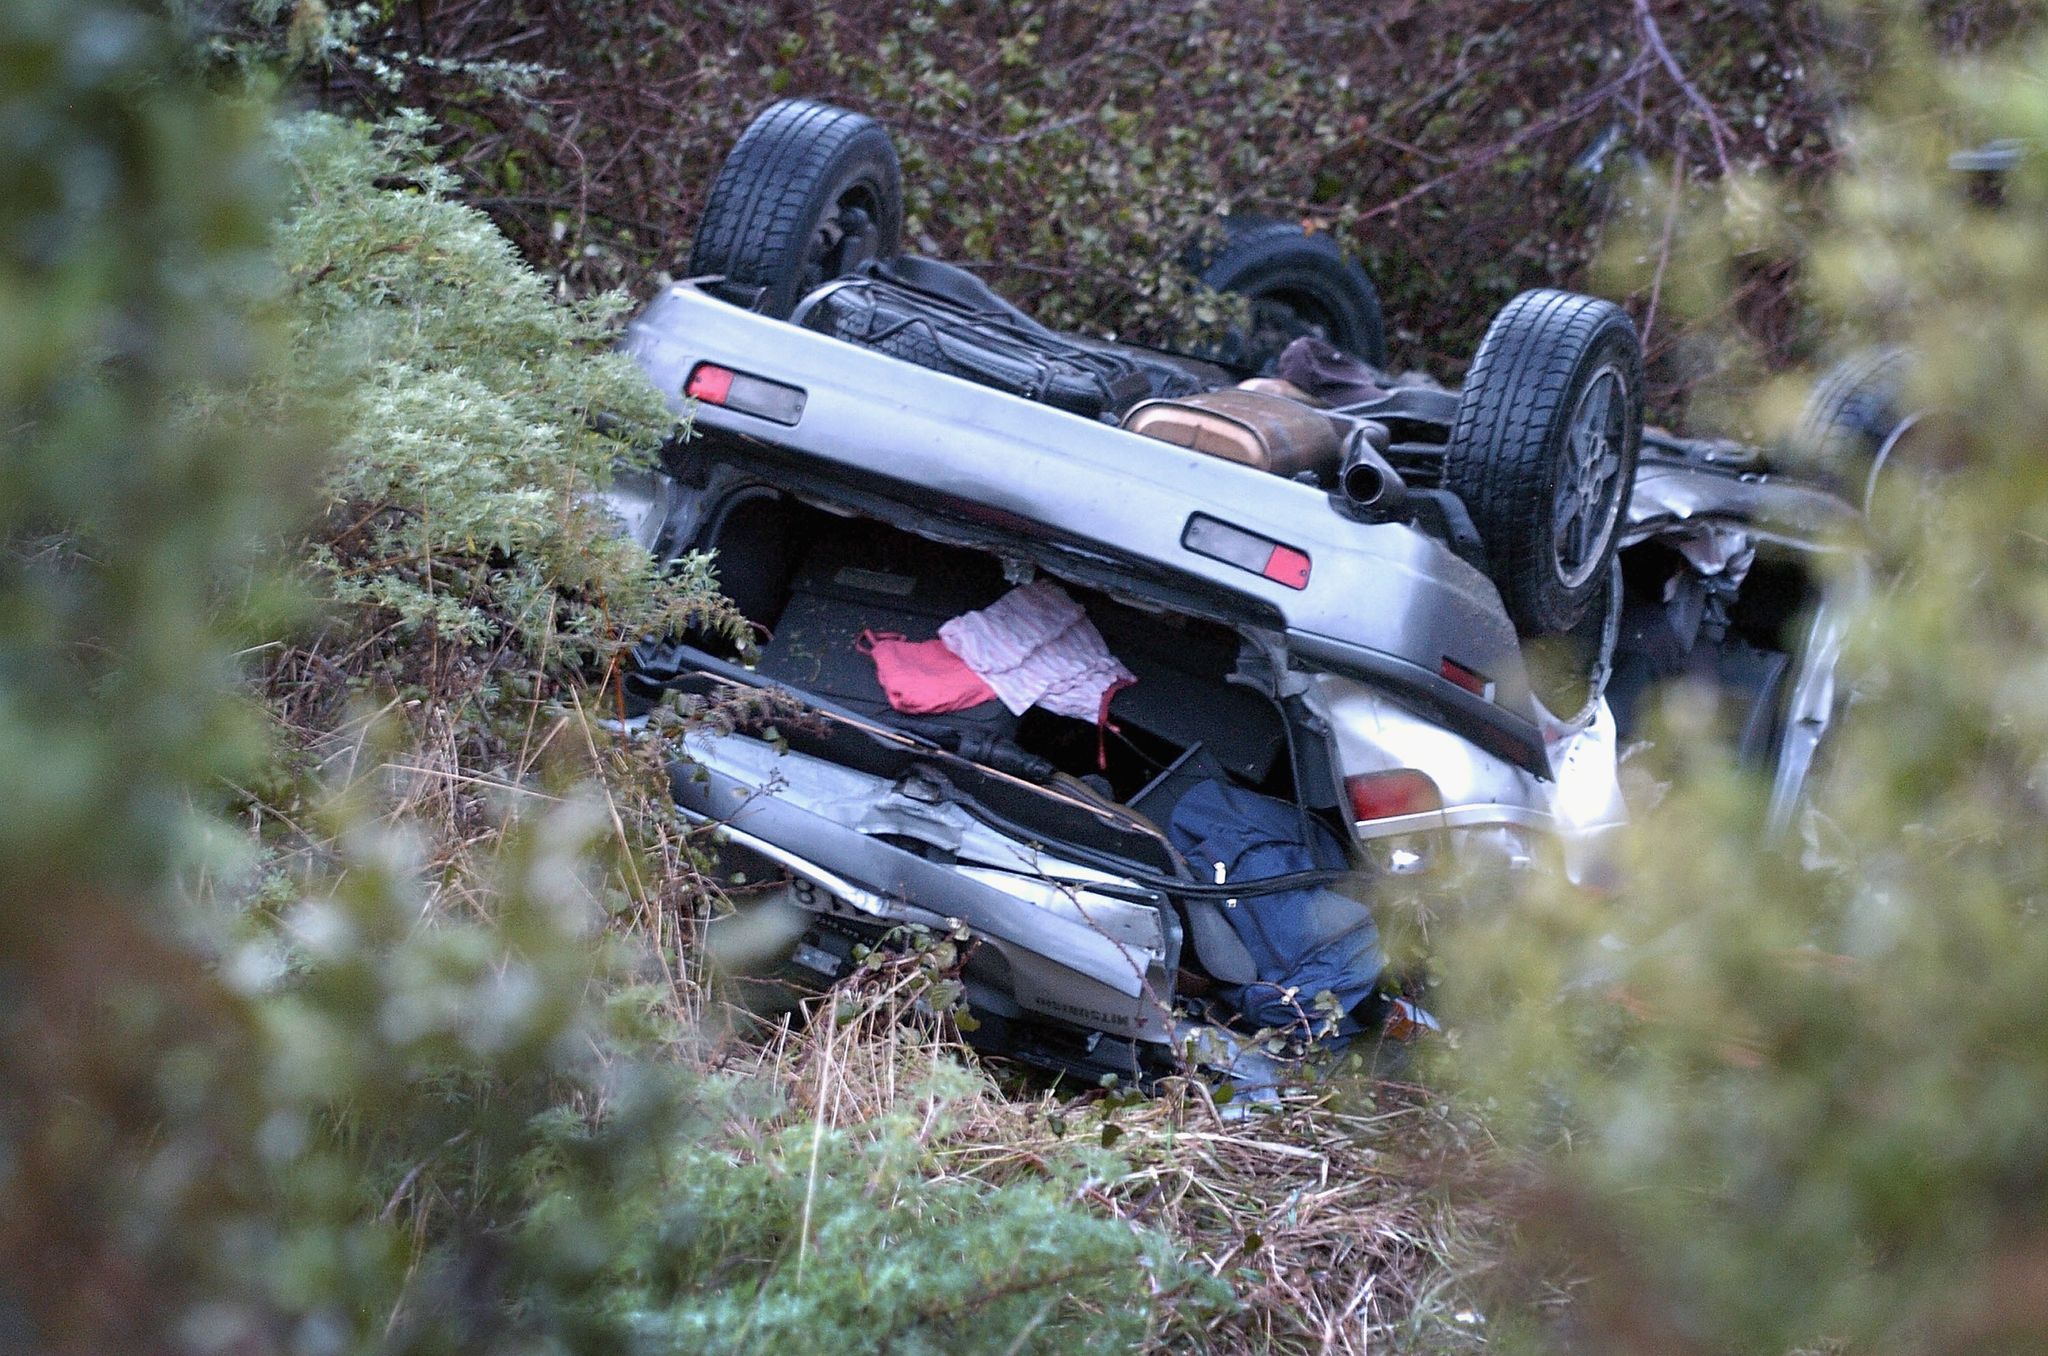 vehicle accident victim rescued after four days